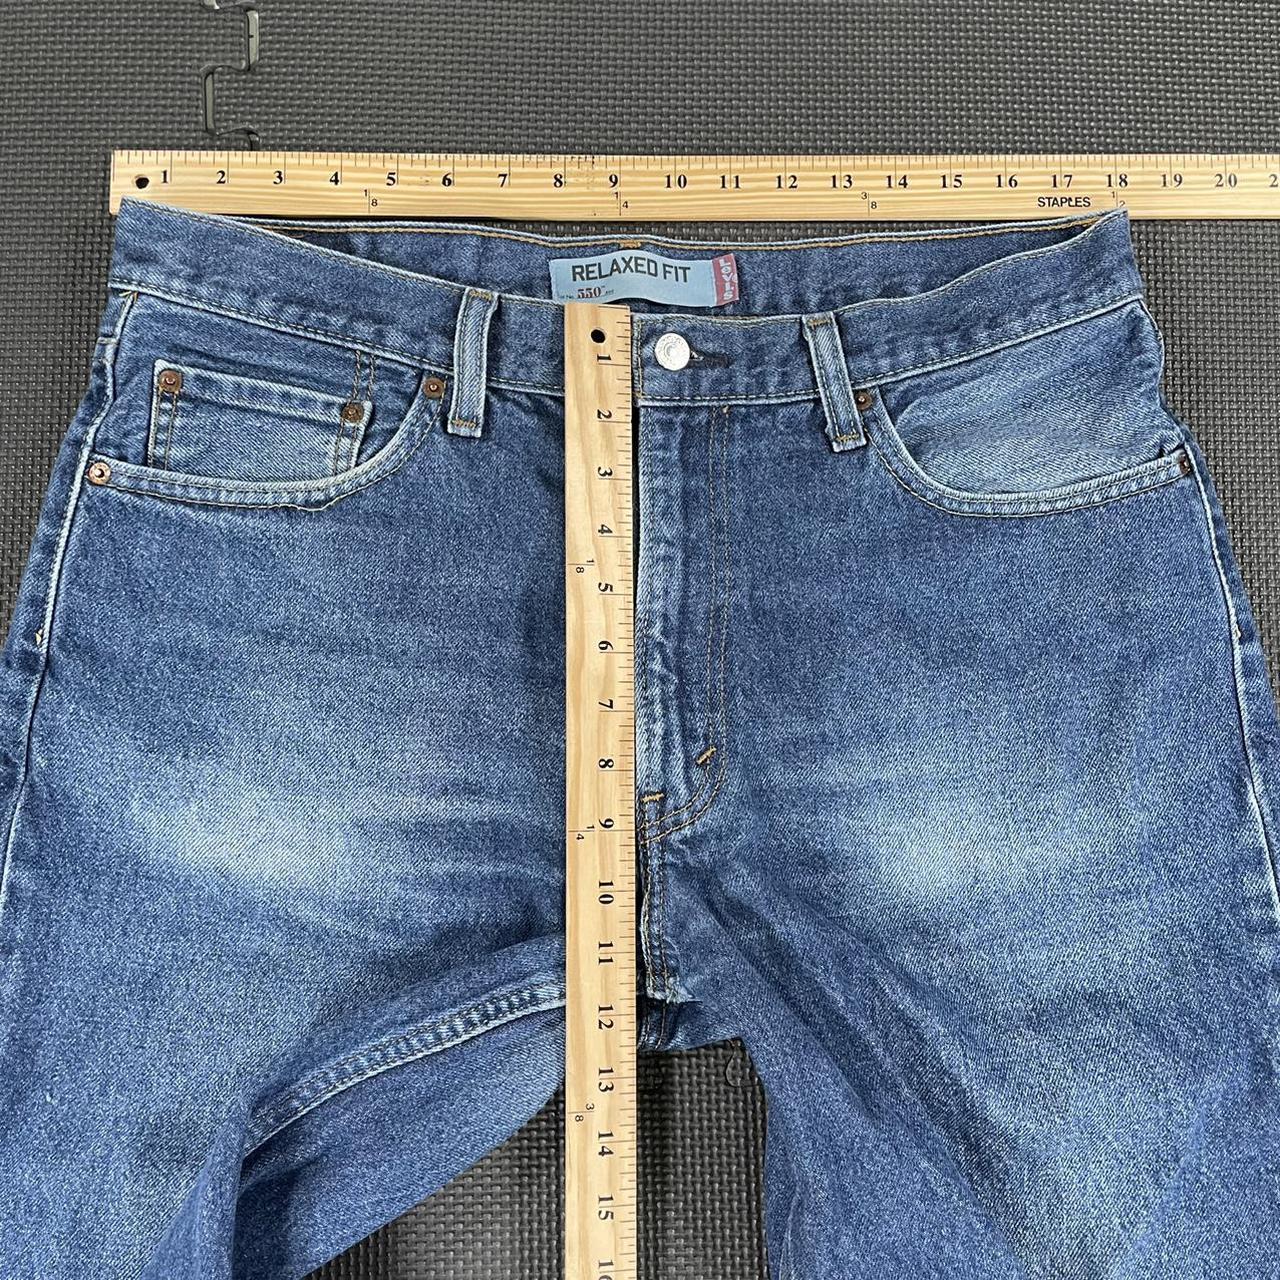 Levis 550 Relaxed Faded Blue Denim Jeans Mens 36x31 Depop 